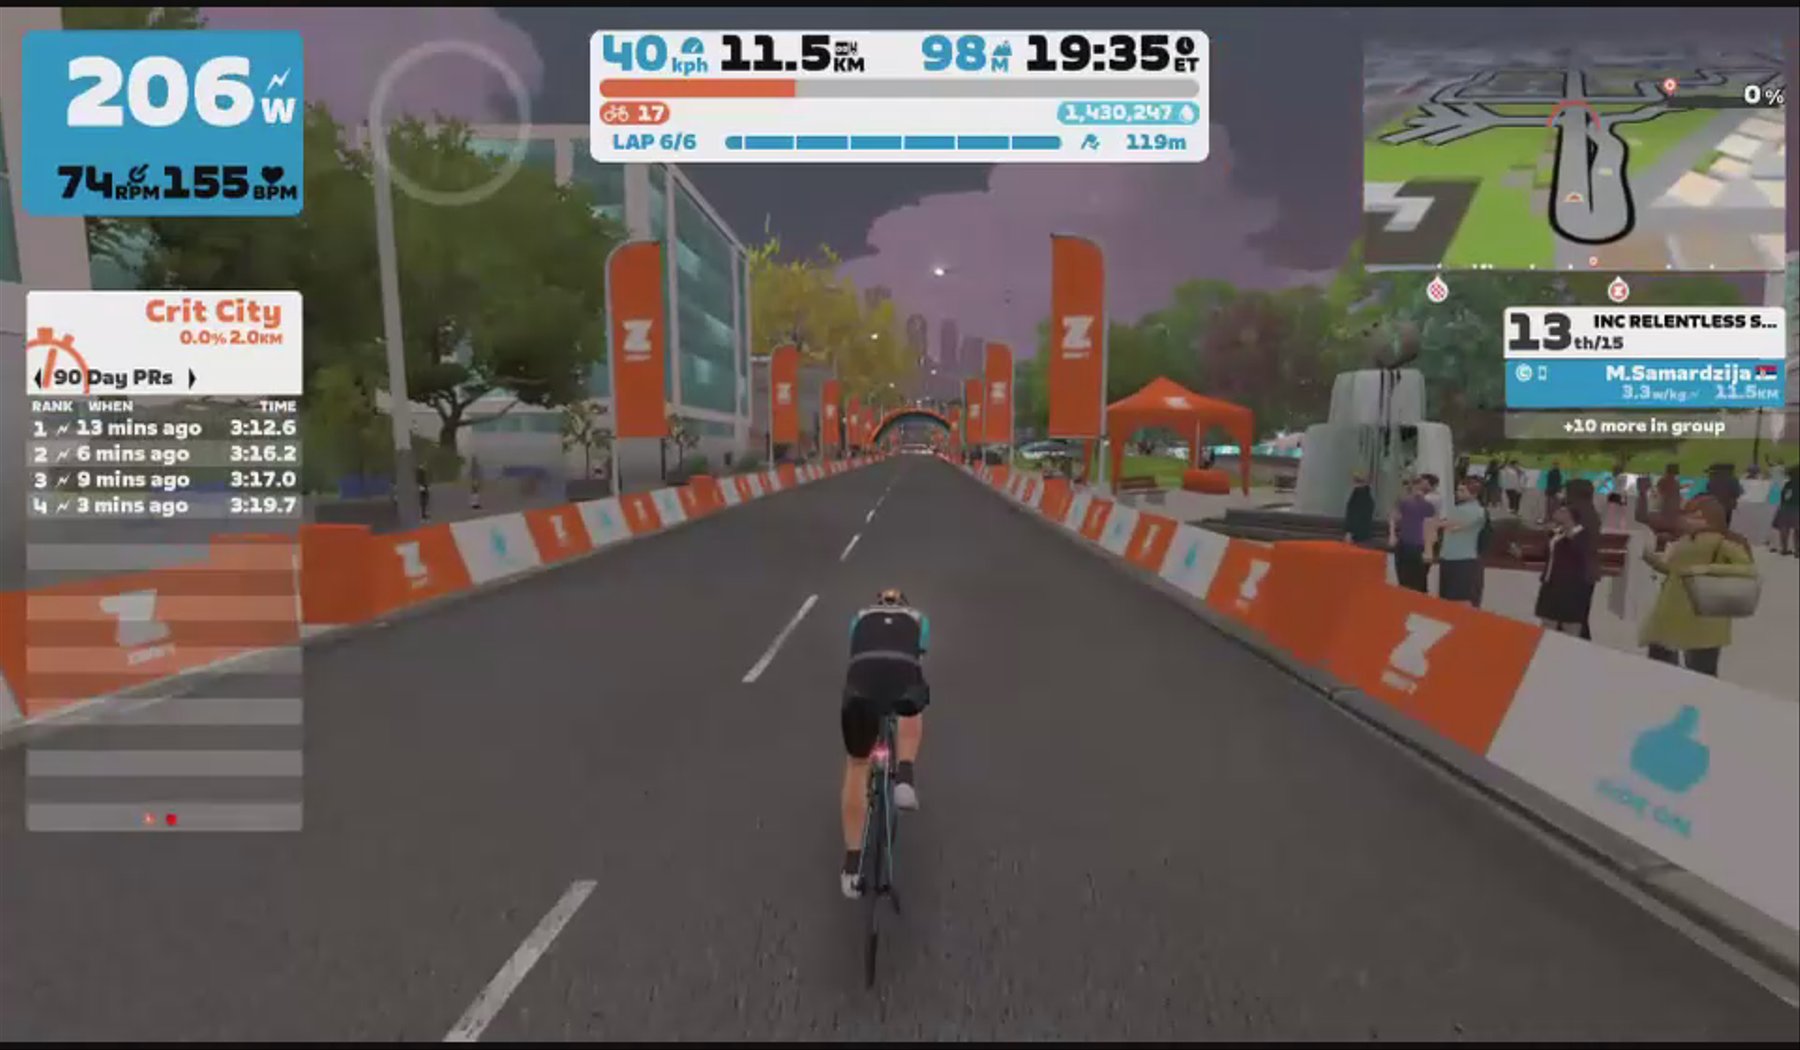 Zwift - Race: INC RELENTLESS Sprint Series Race 2 (C) on Downtown Dolphin in Crit City